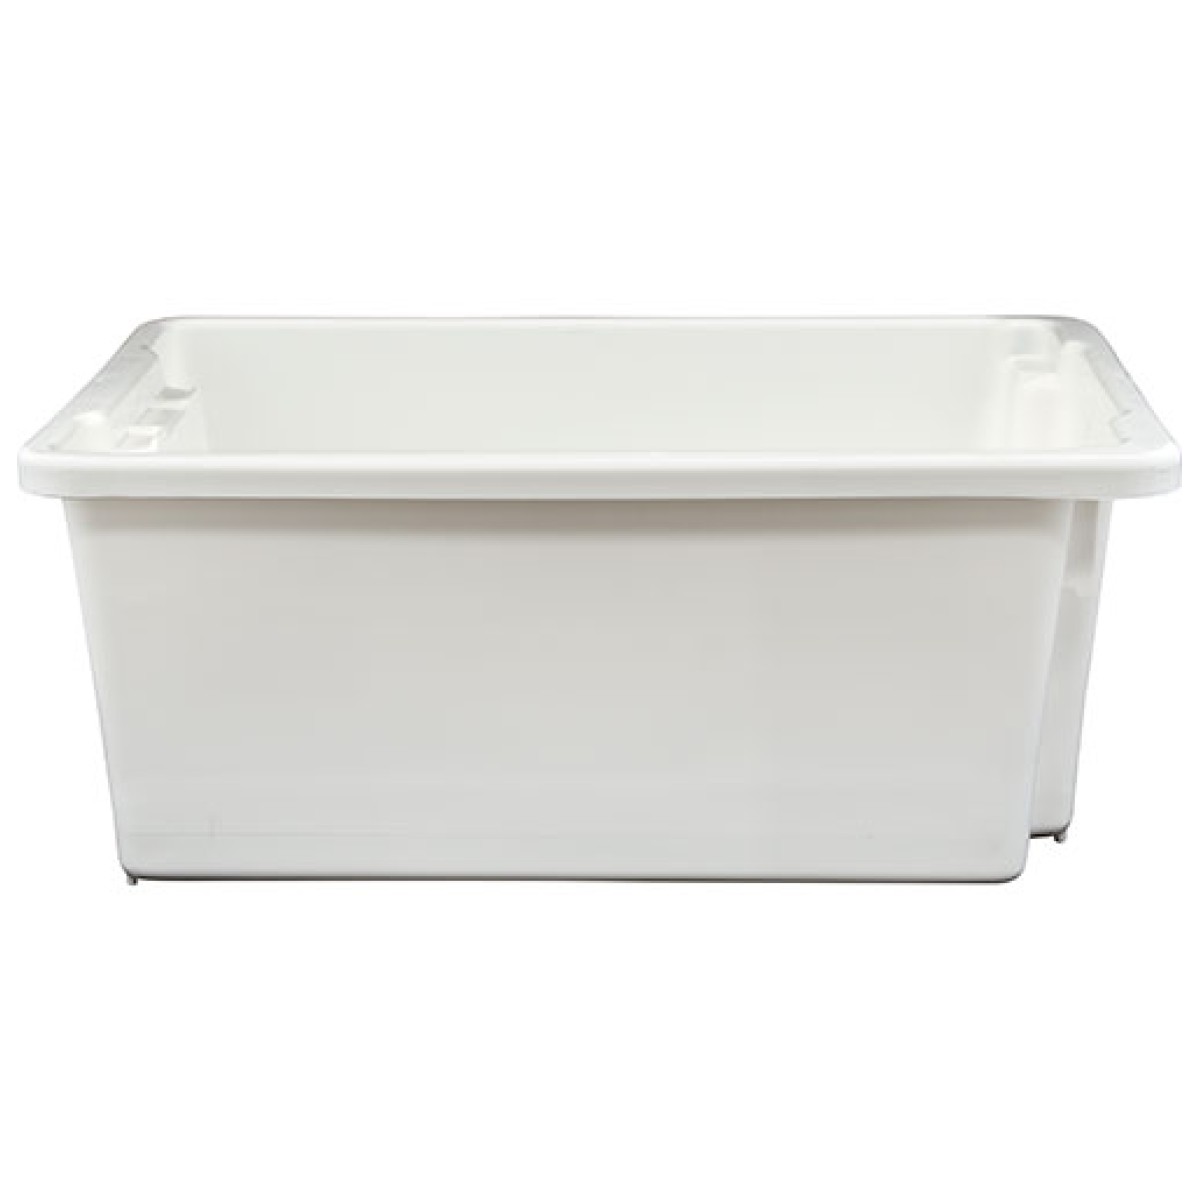 TRAY STACKANDNEST 52ltr WHITE (LRG) No.10